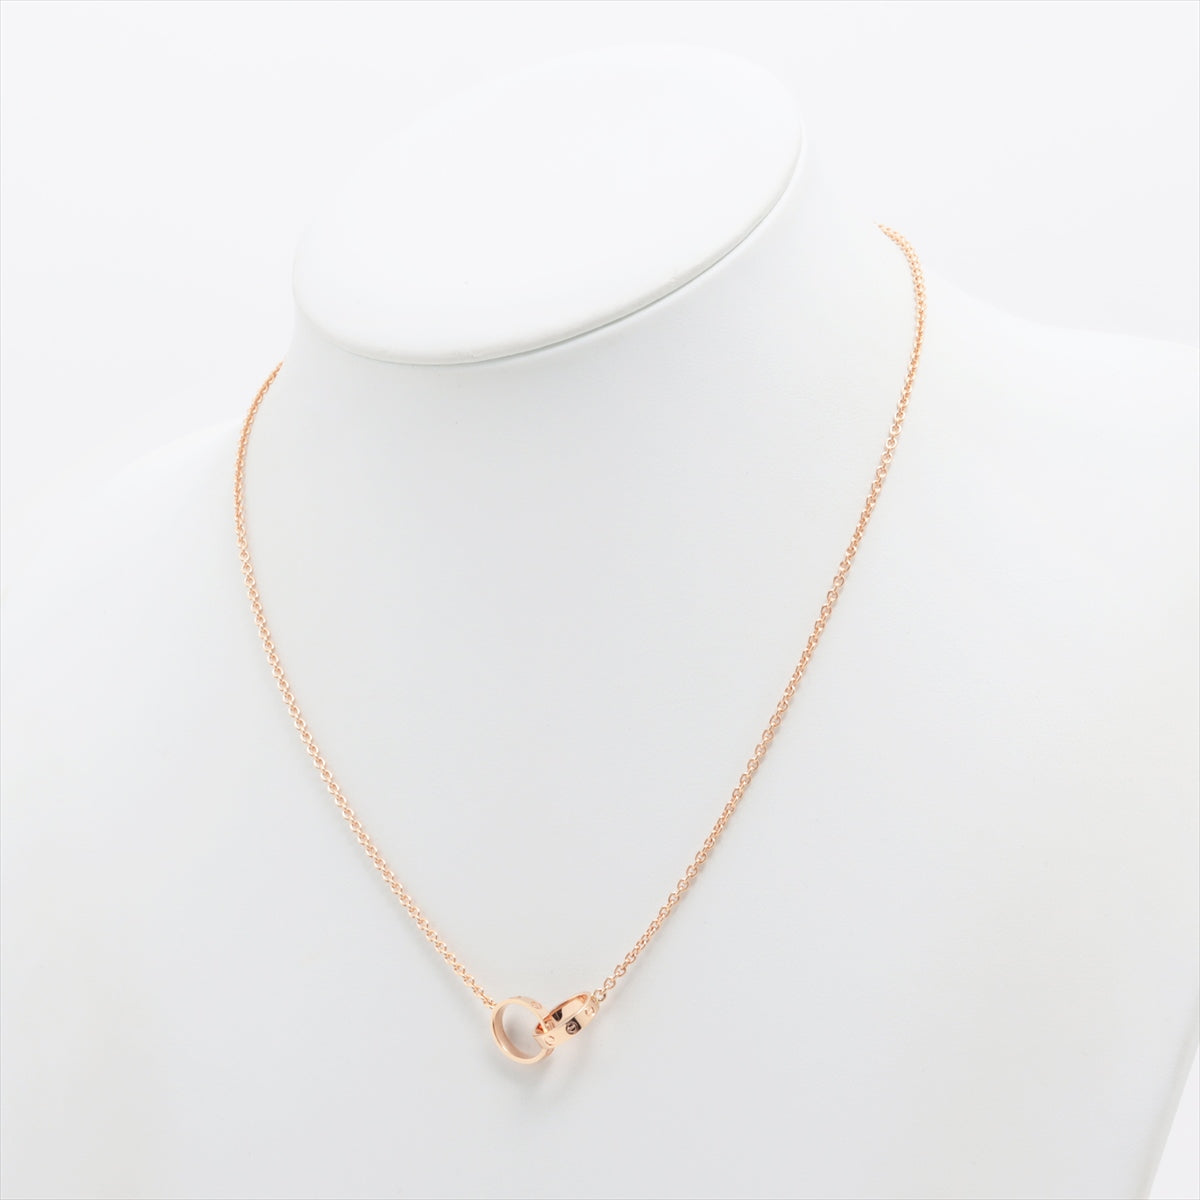 Cartier Baby Love Necklace 750(PG) 7.4g